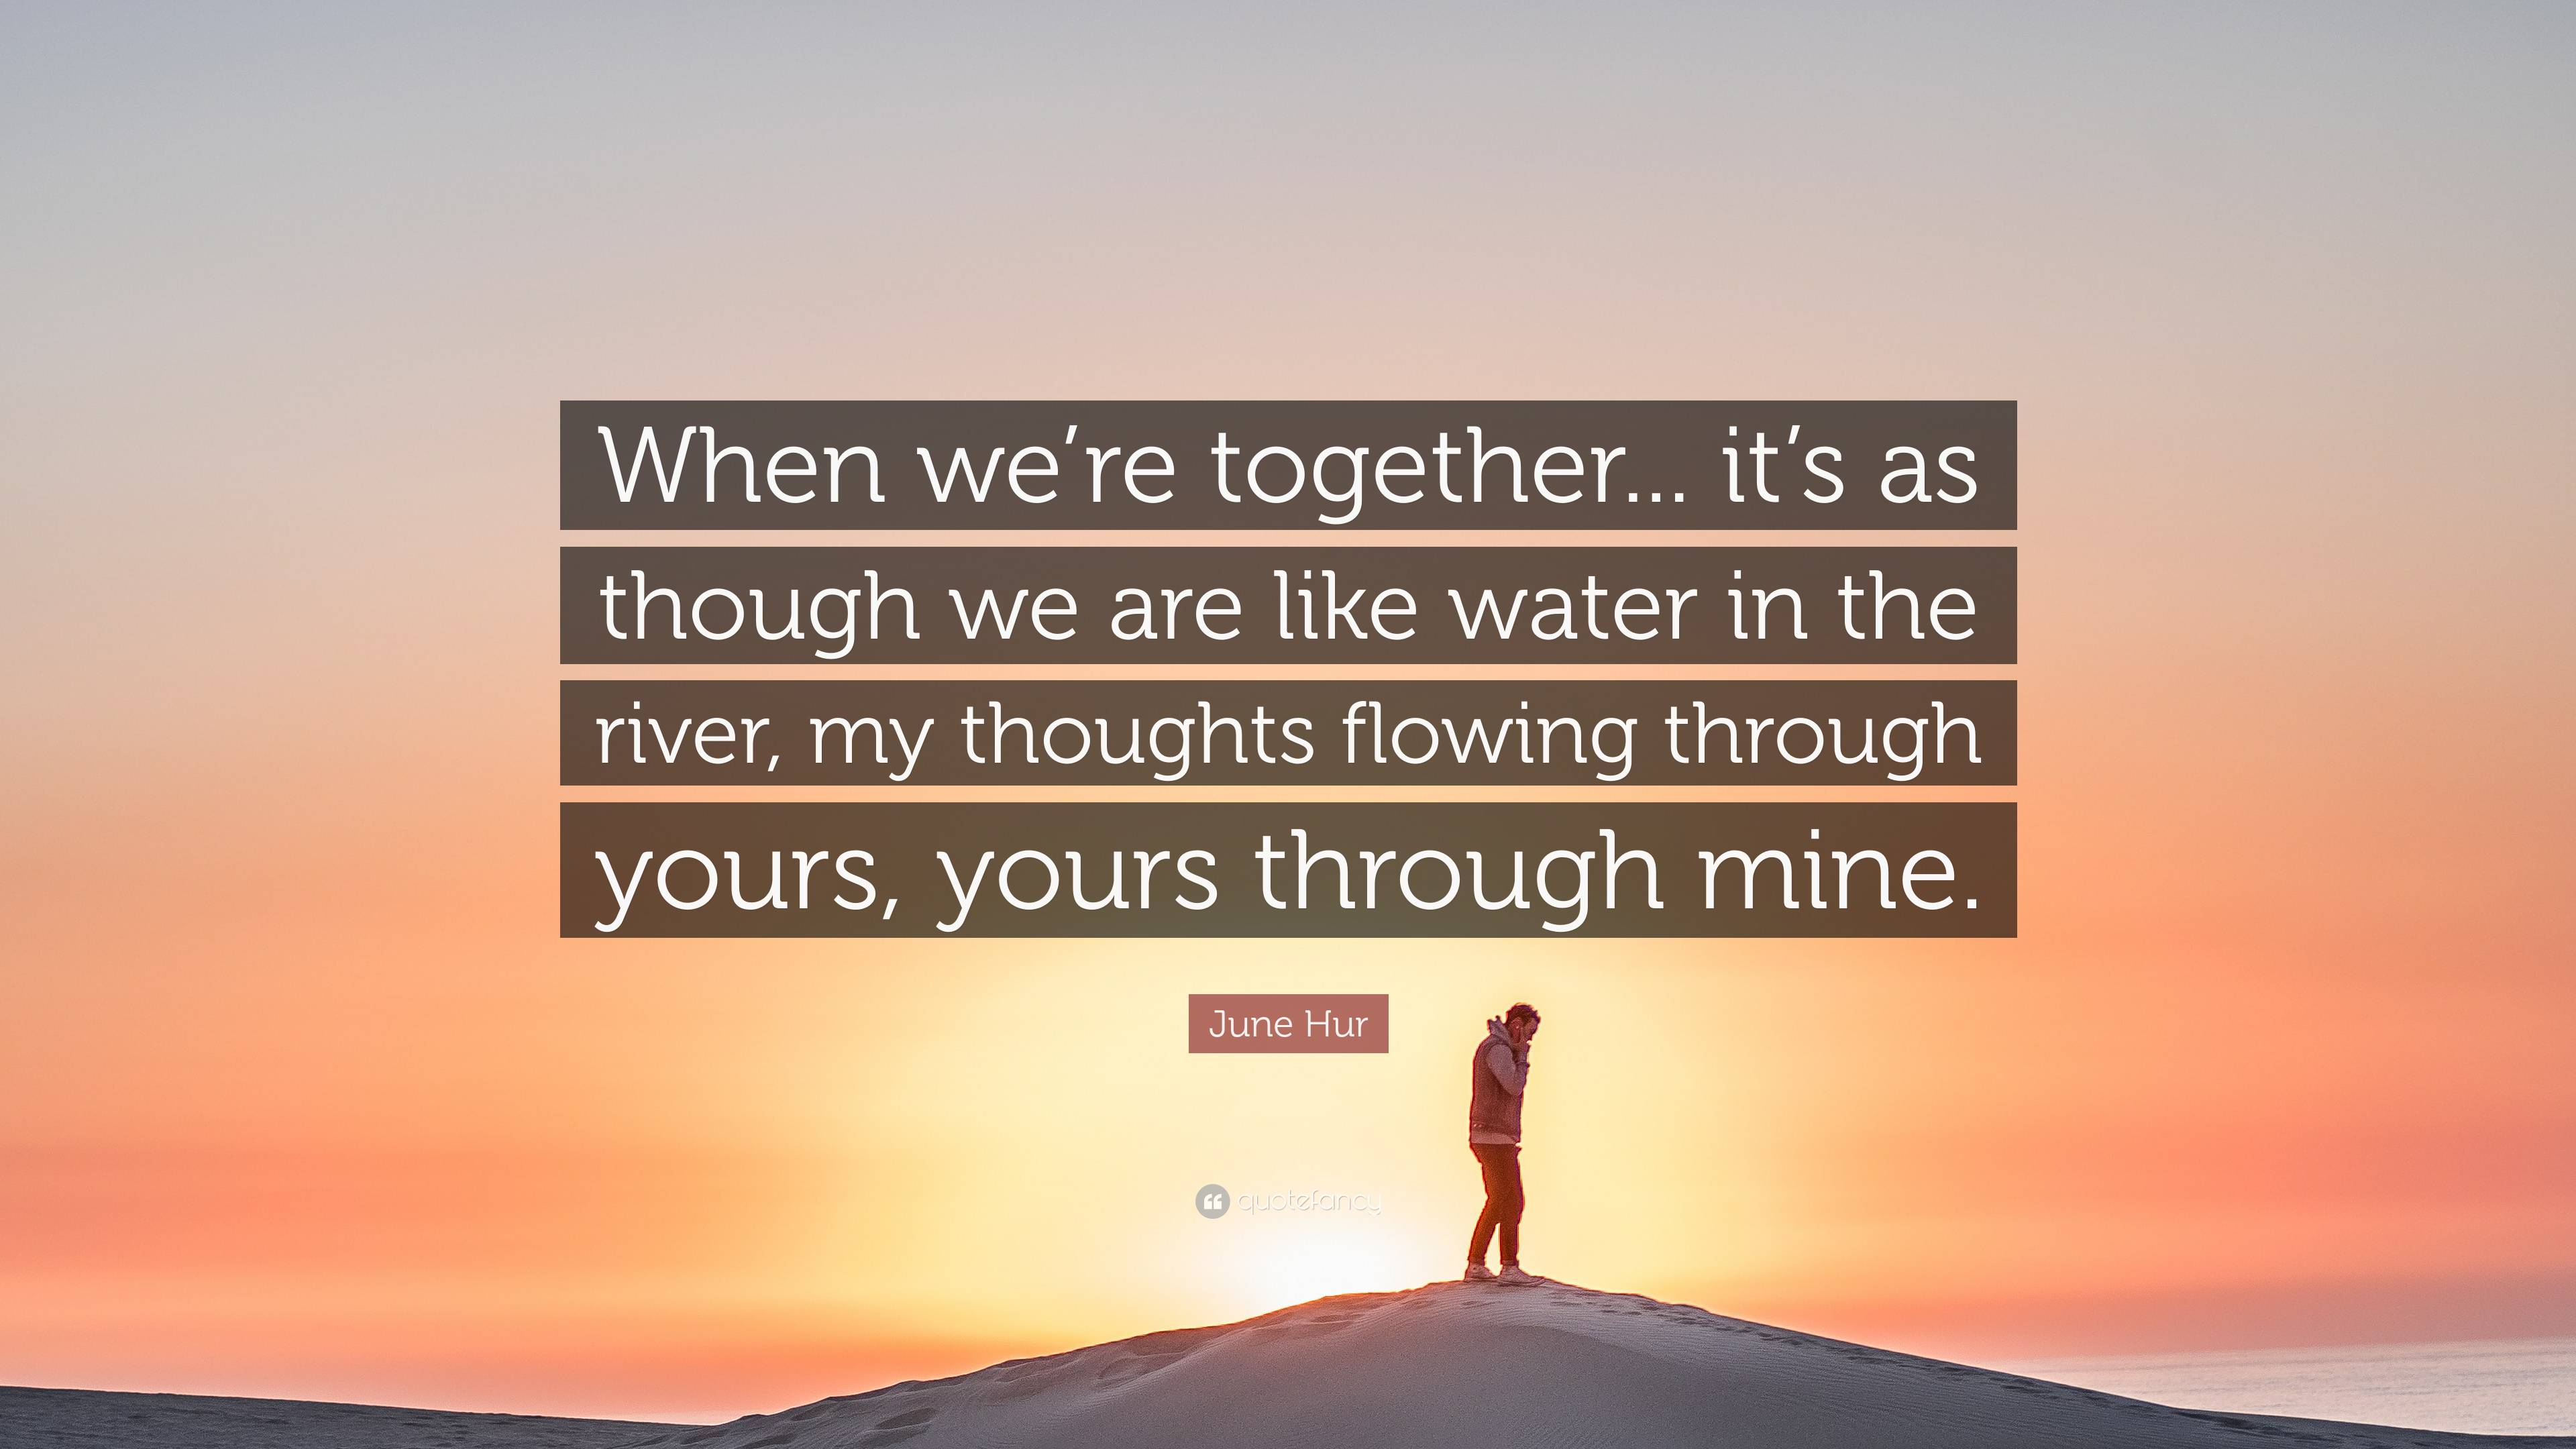 June Hur Quote: “When we’re together... it’s as though we are like ...